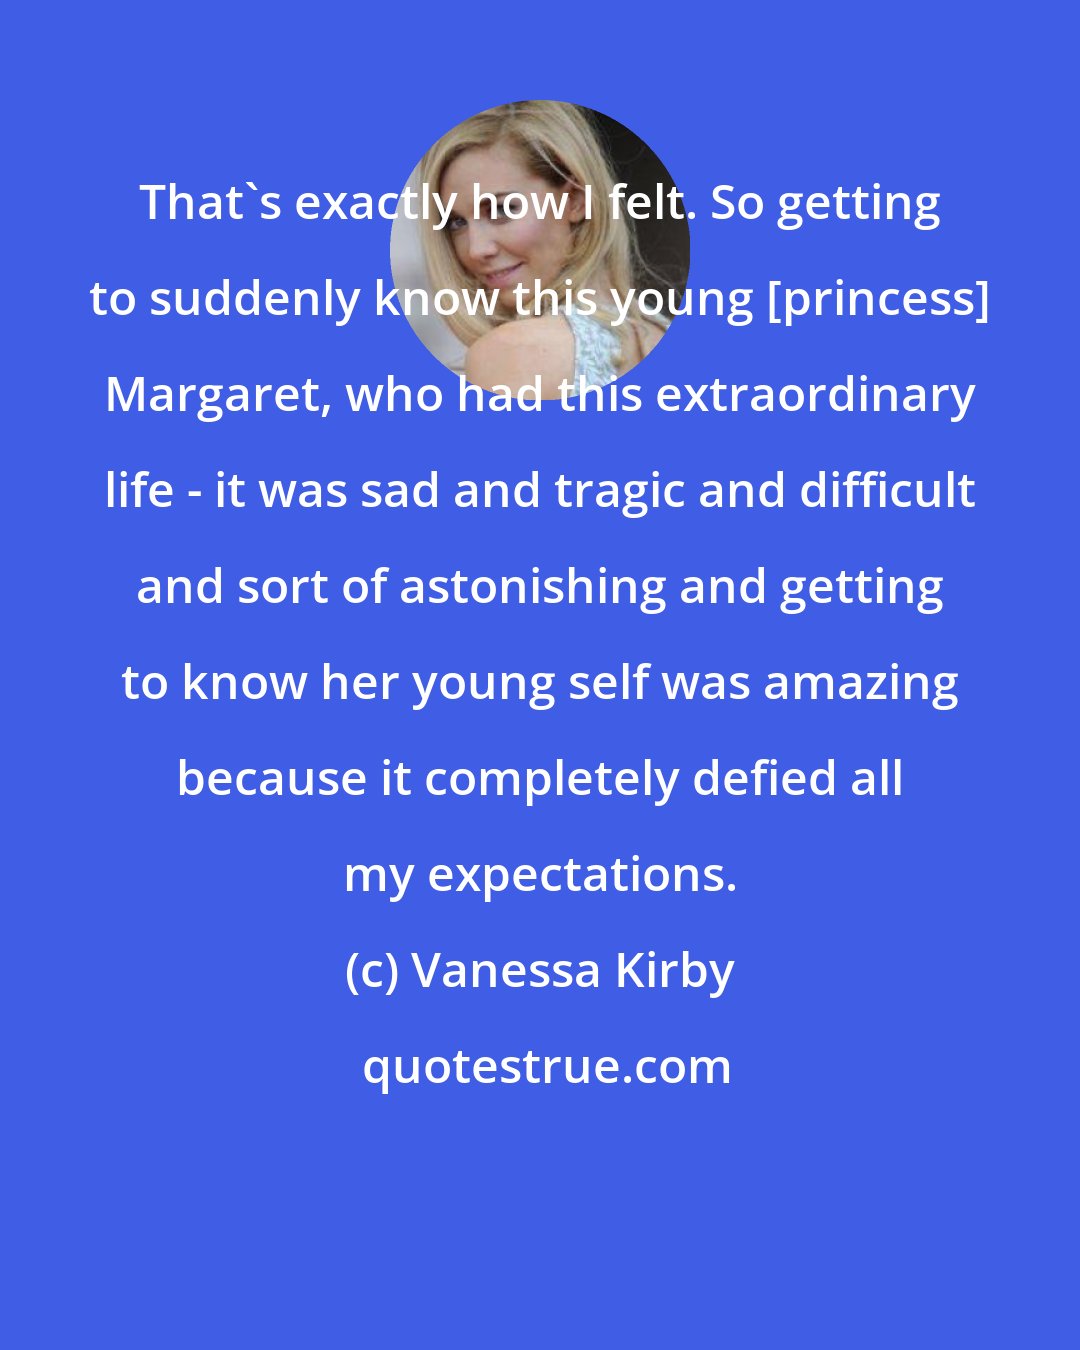 Vanessa Kirby: That's exactly how I felt. So getting to suddenly know this young [princess] Margaret, who had this extraordinary life - it was sad and tragic and difficult and sort of astonishing and getting to know her young self was amazing because it completely defied all my expectations.